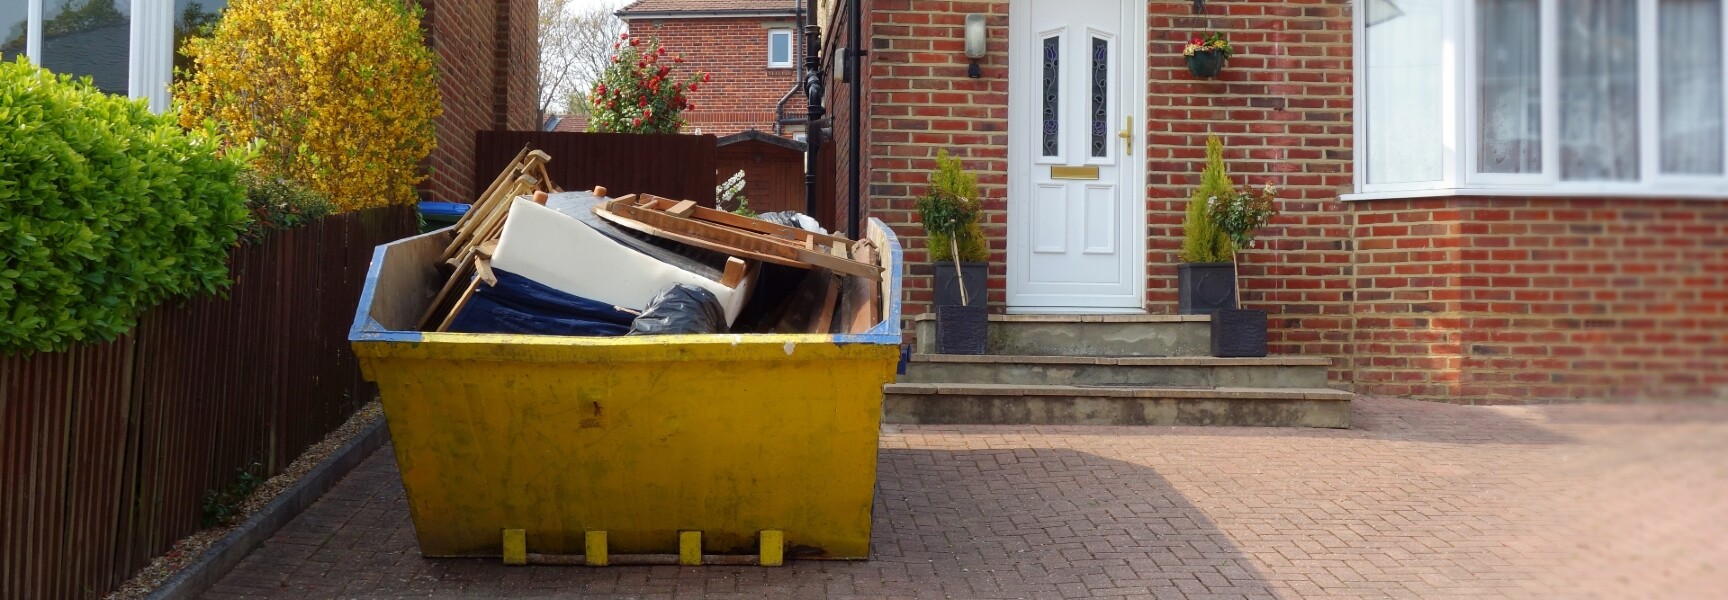 A large green skip bin filled with various types of waste, including cardboard boxes, wood, and construction debris.